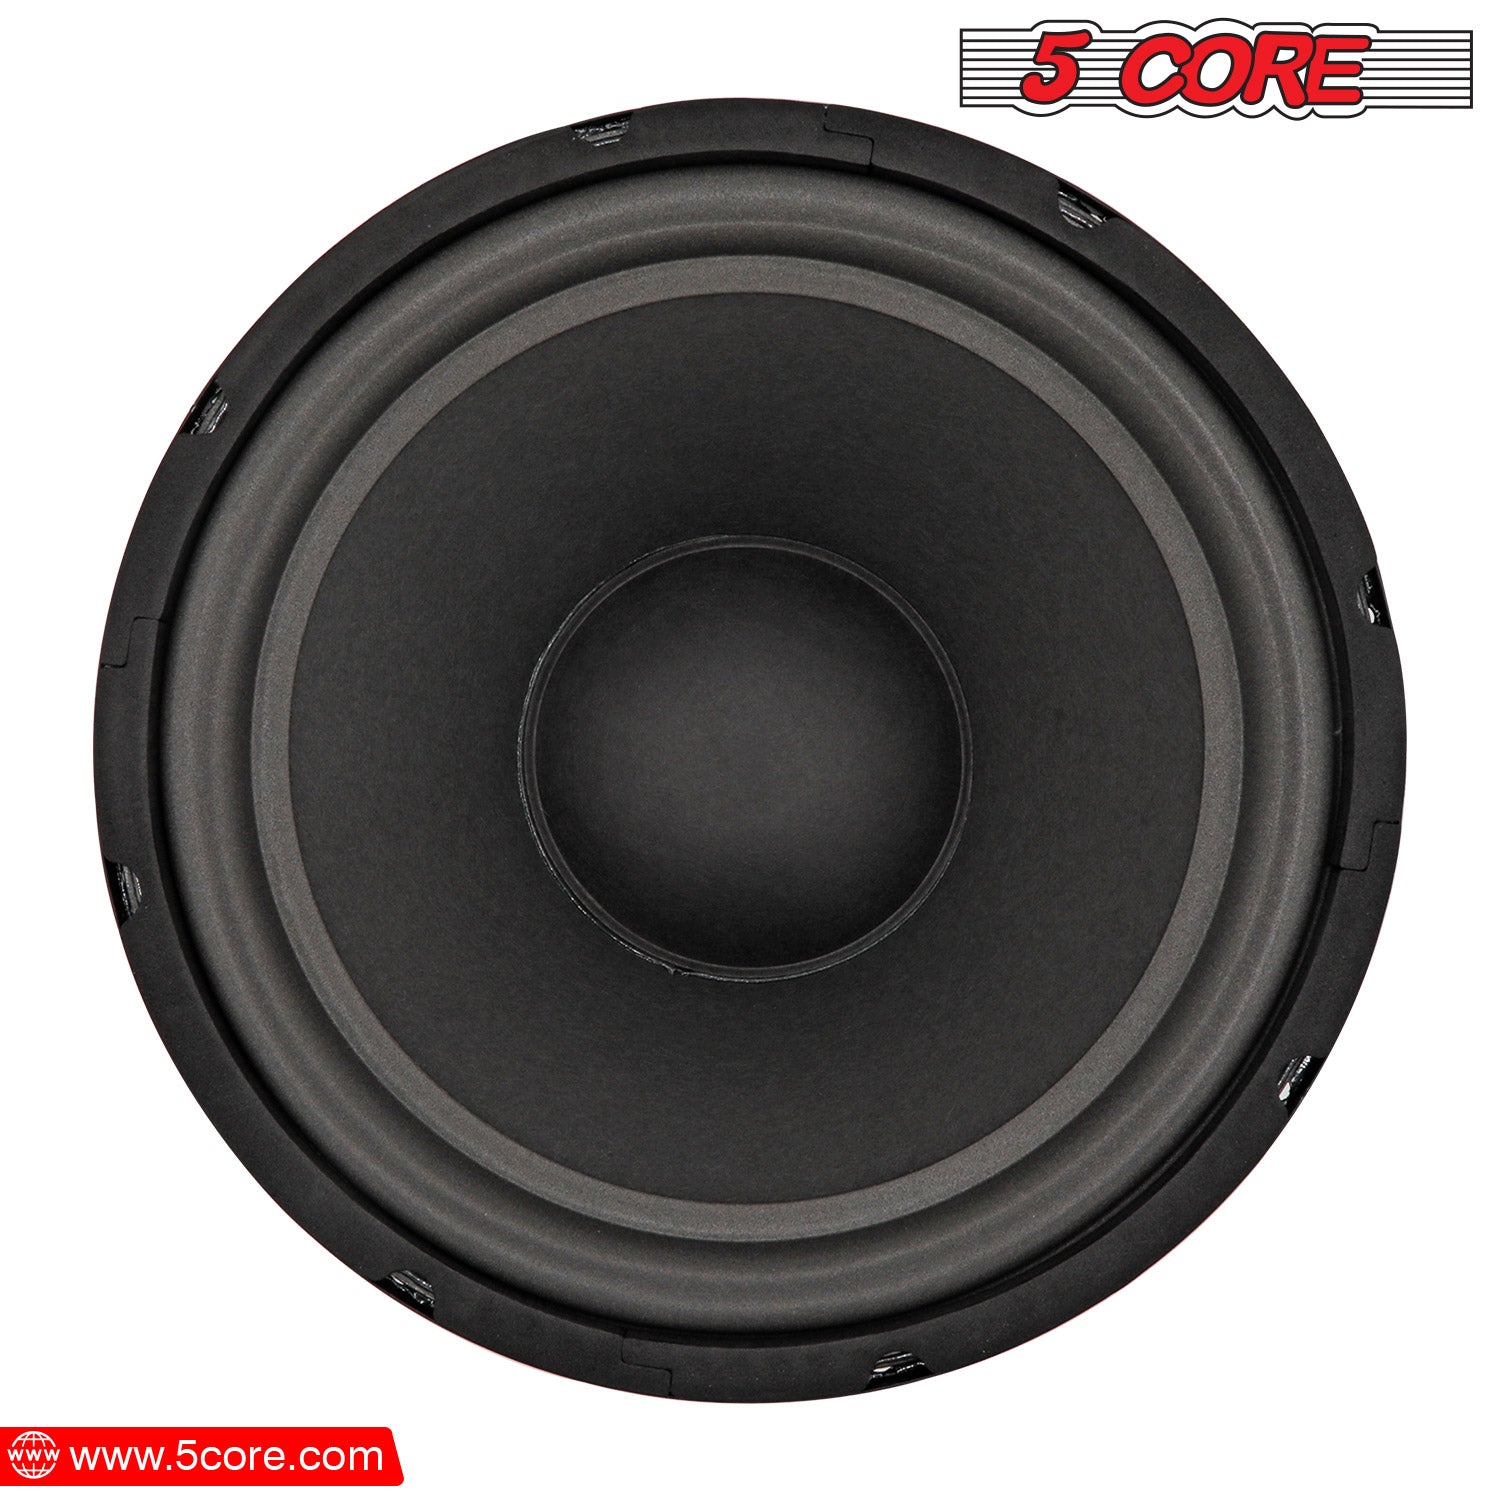 10 inch subwoofer with 750w PMPO